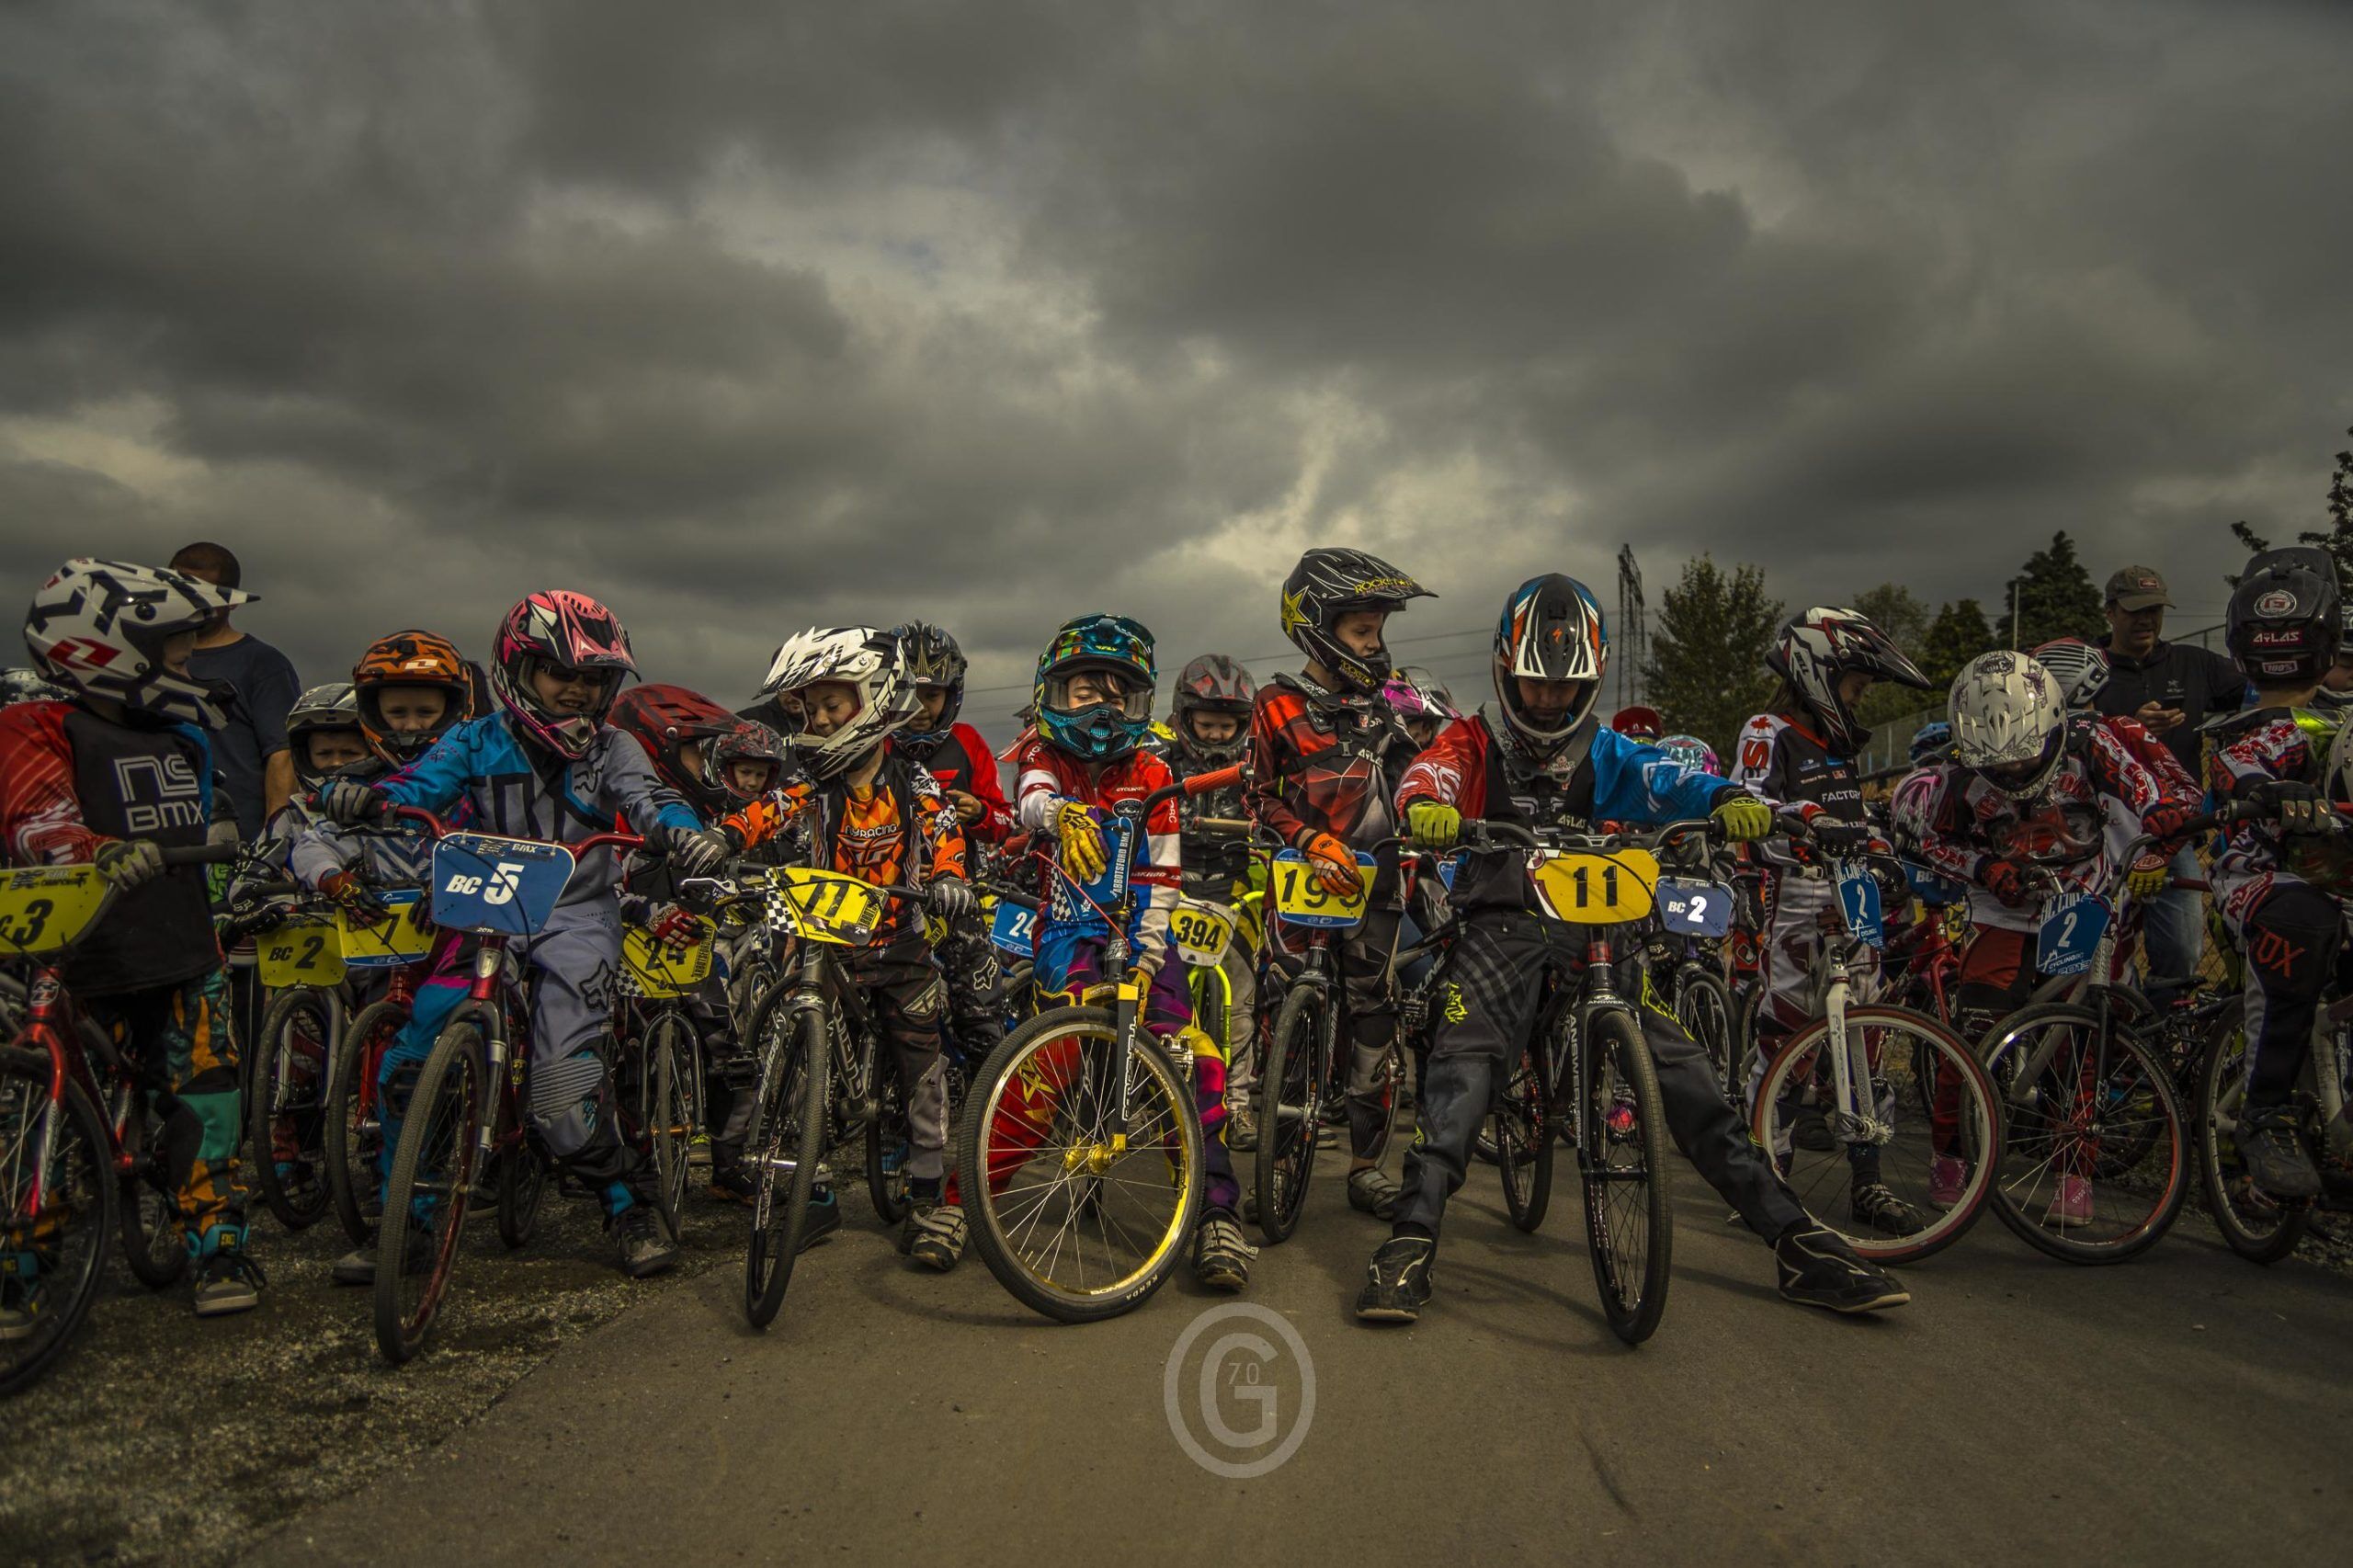 BMX Races waiting to start their race